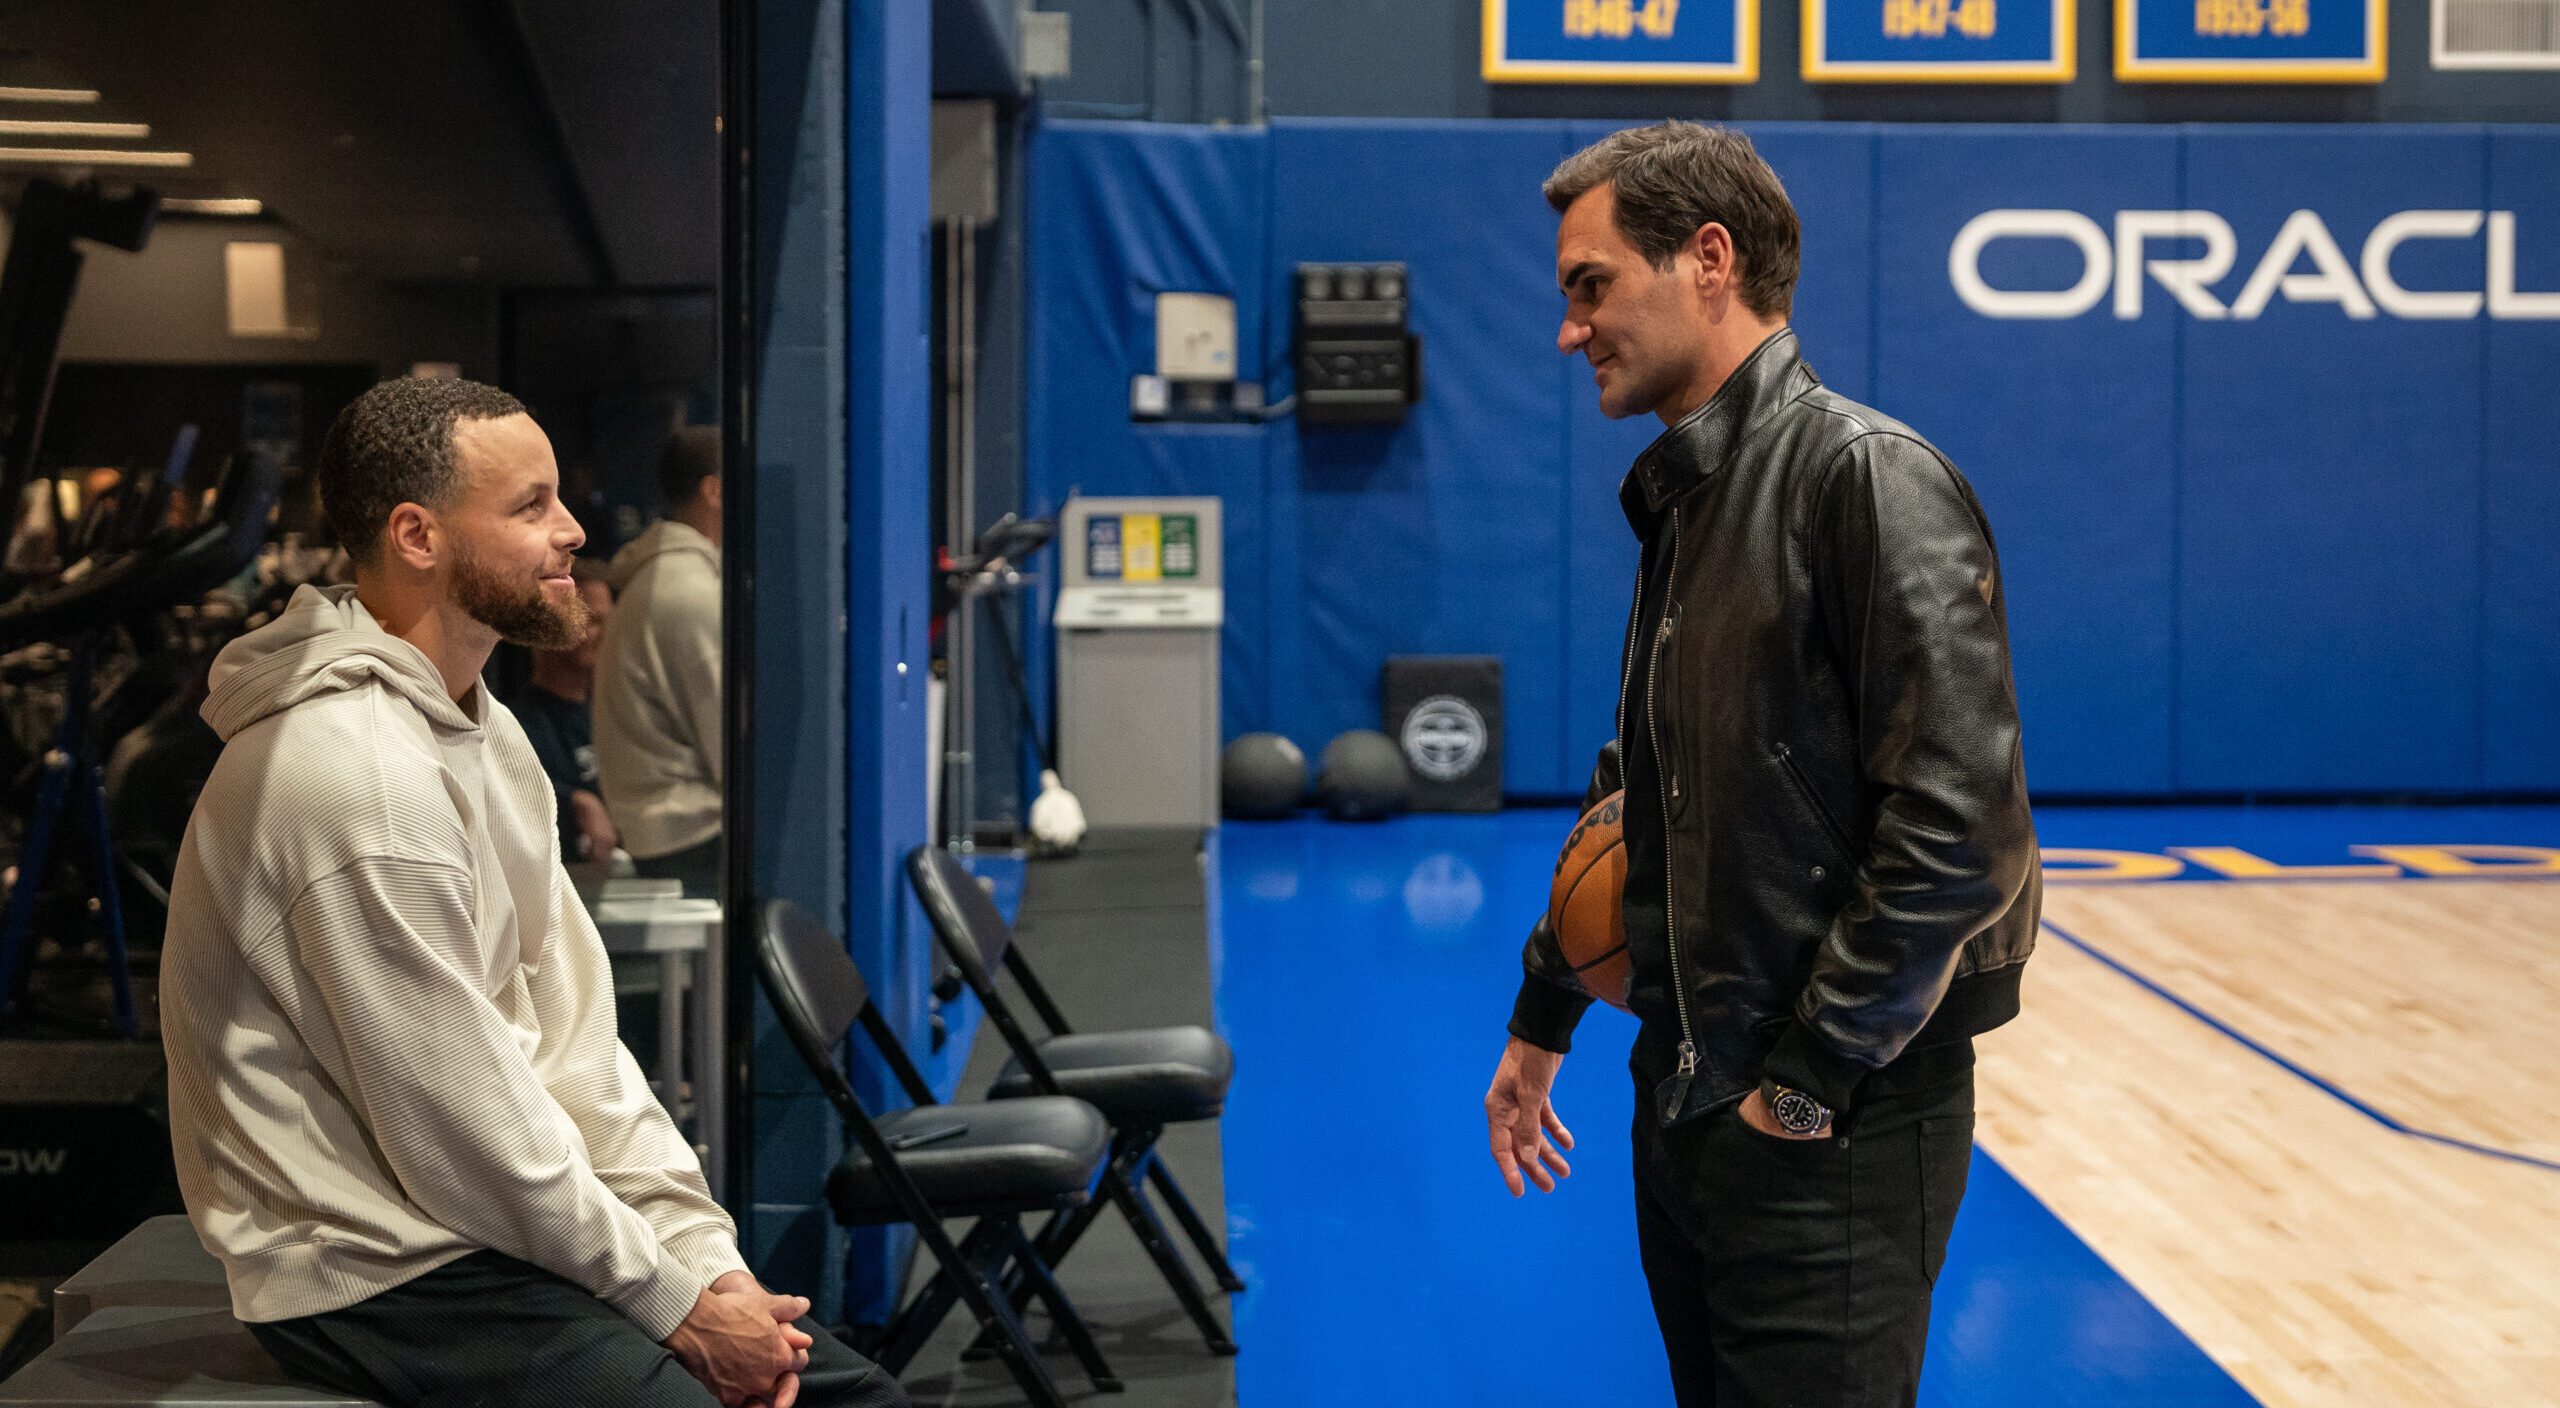   
																“Iconic”: Tennis Legend Roger Federer Meets Golden State Warriors Star Stephen Curry 
															 